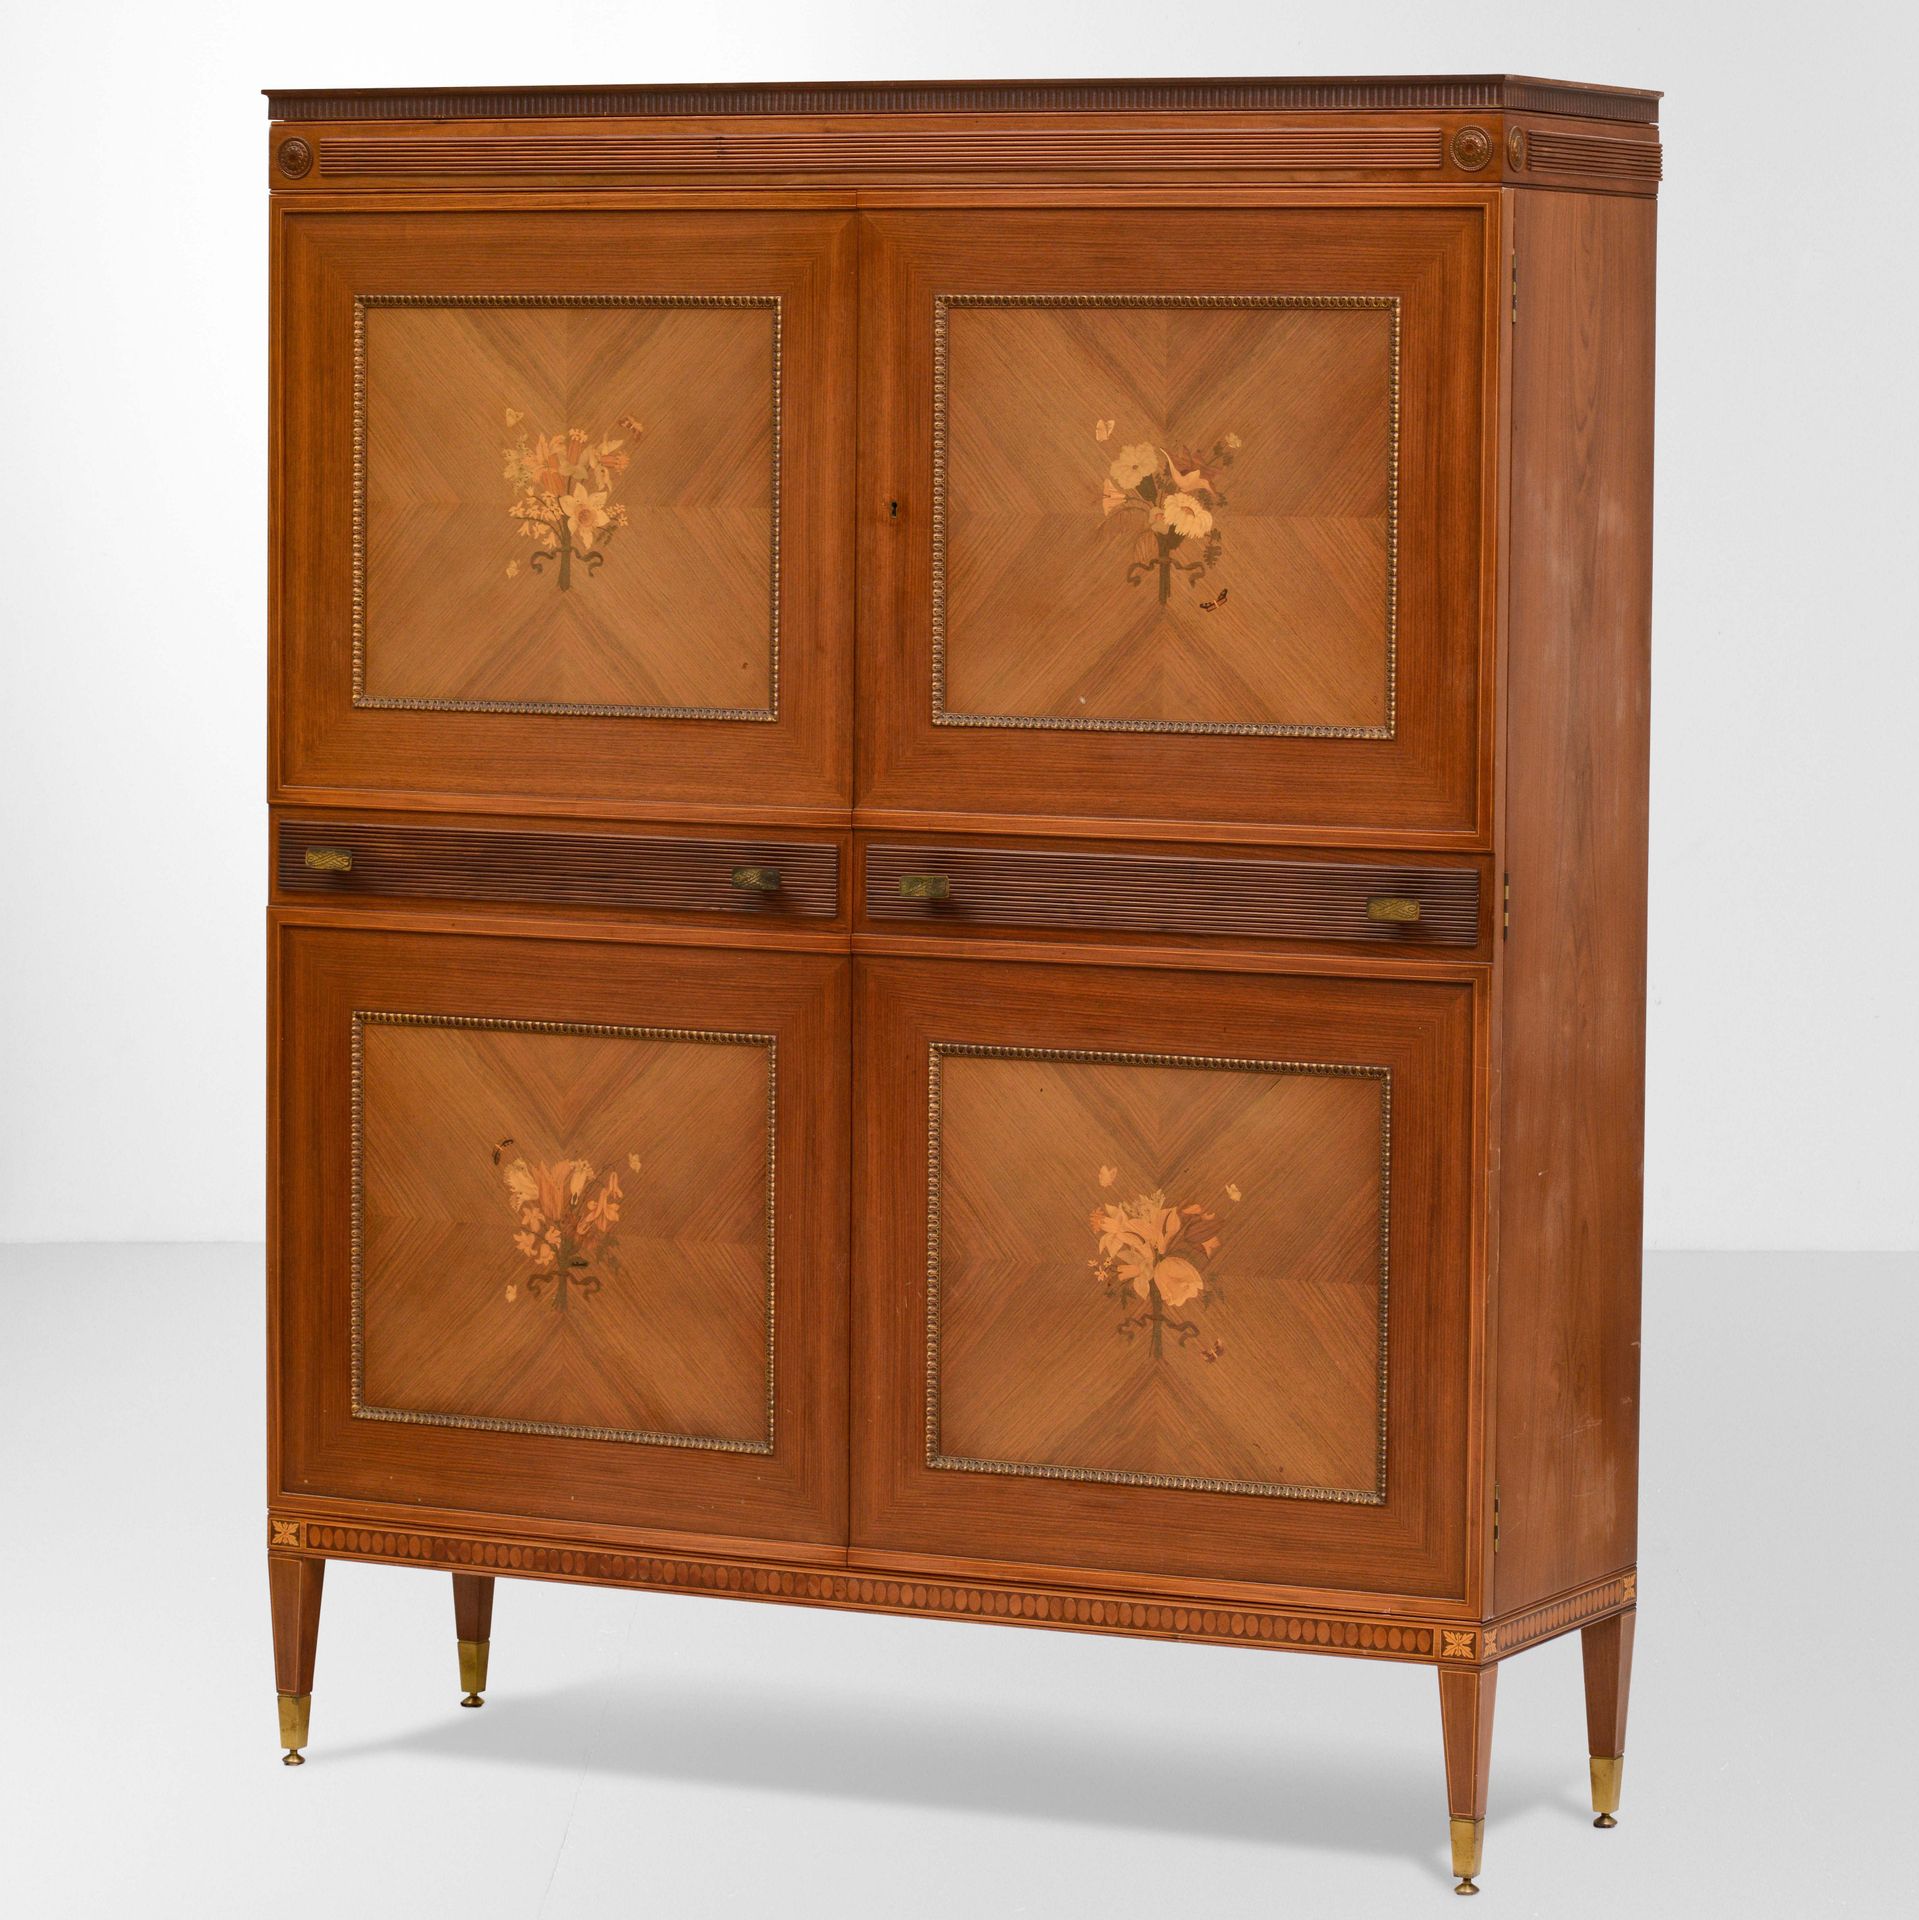 Paolo Maggi, Bar cabinet with wooden frame and supports, inlaid wooden doors and&hellip;